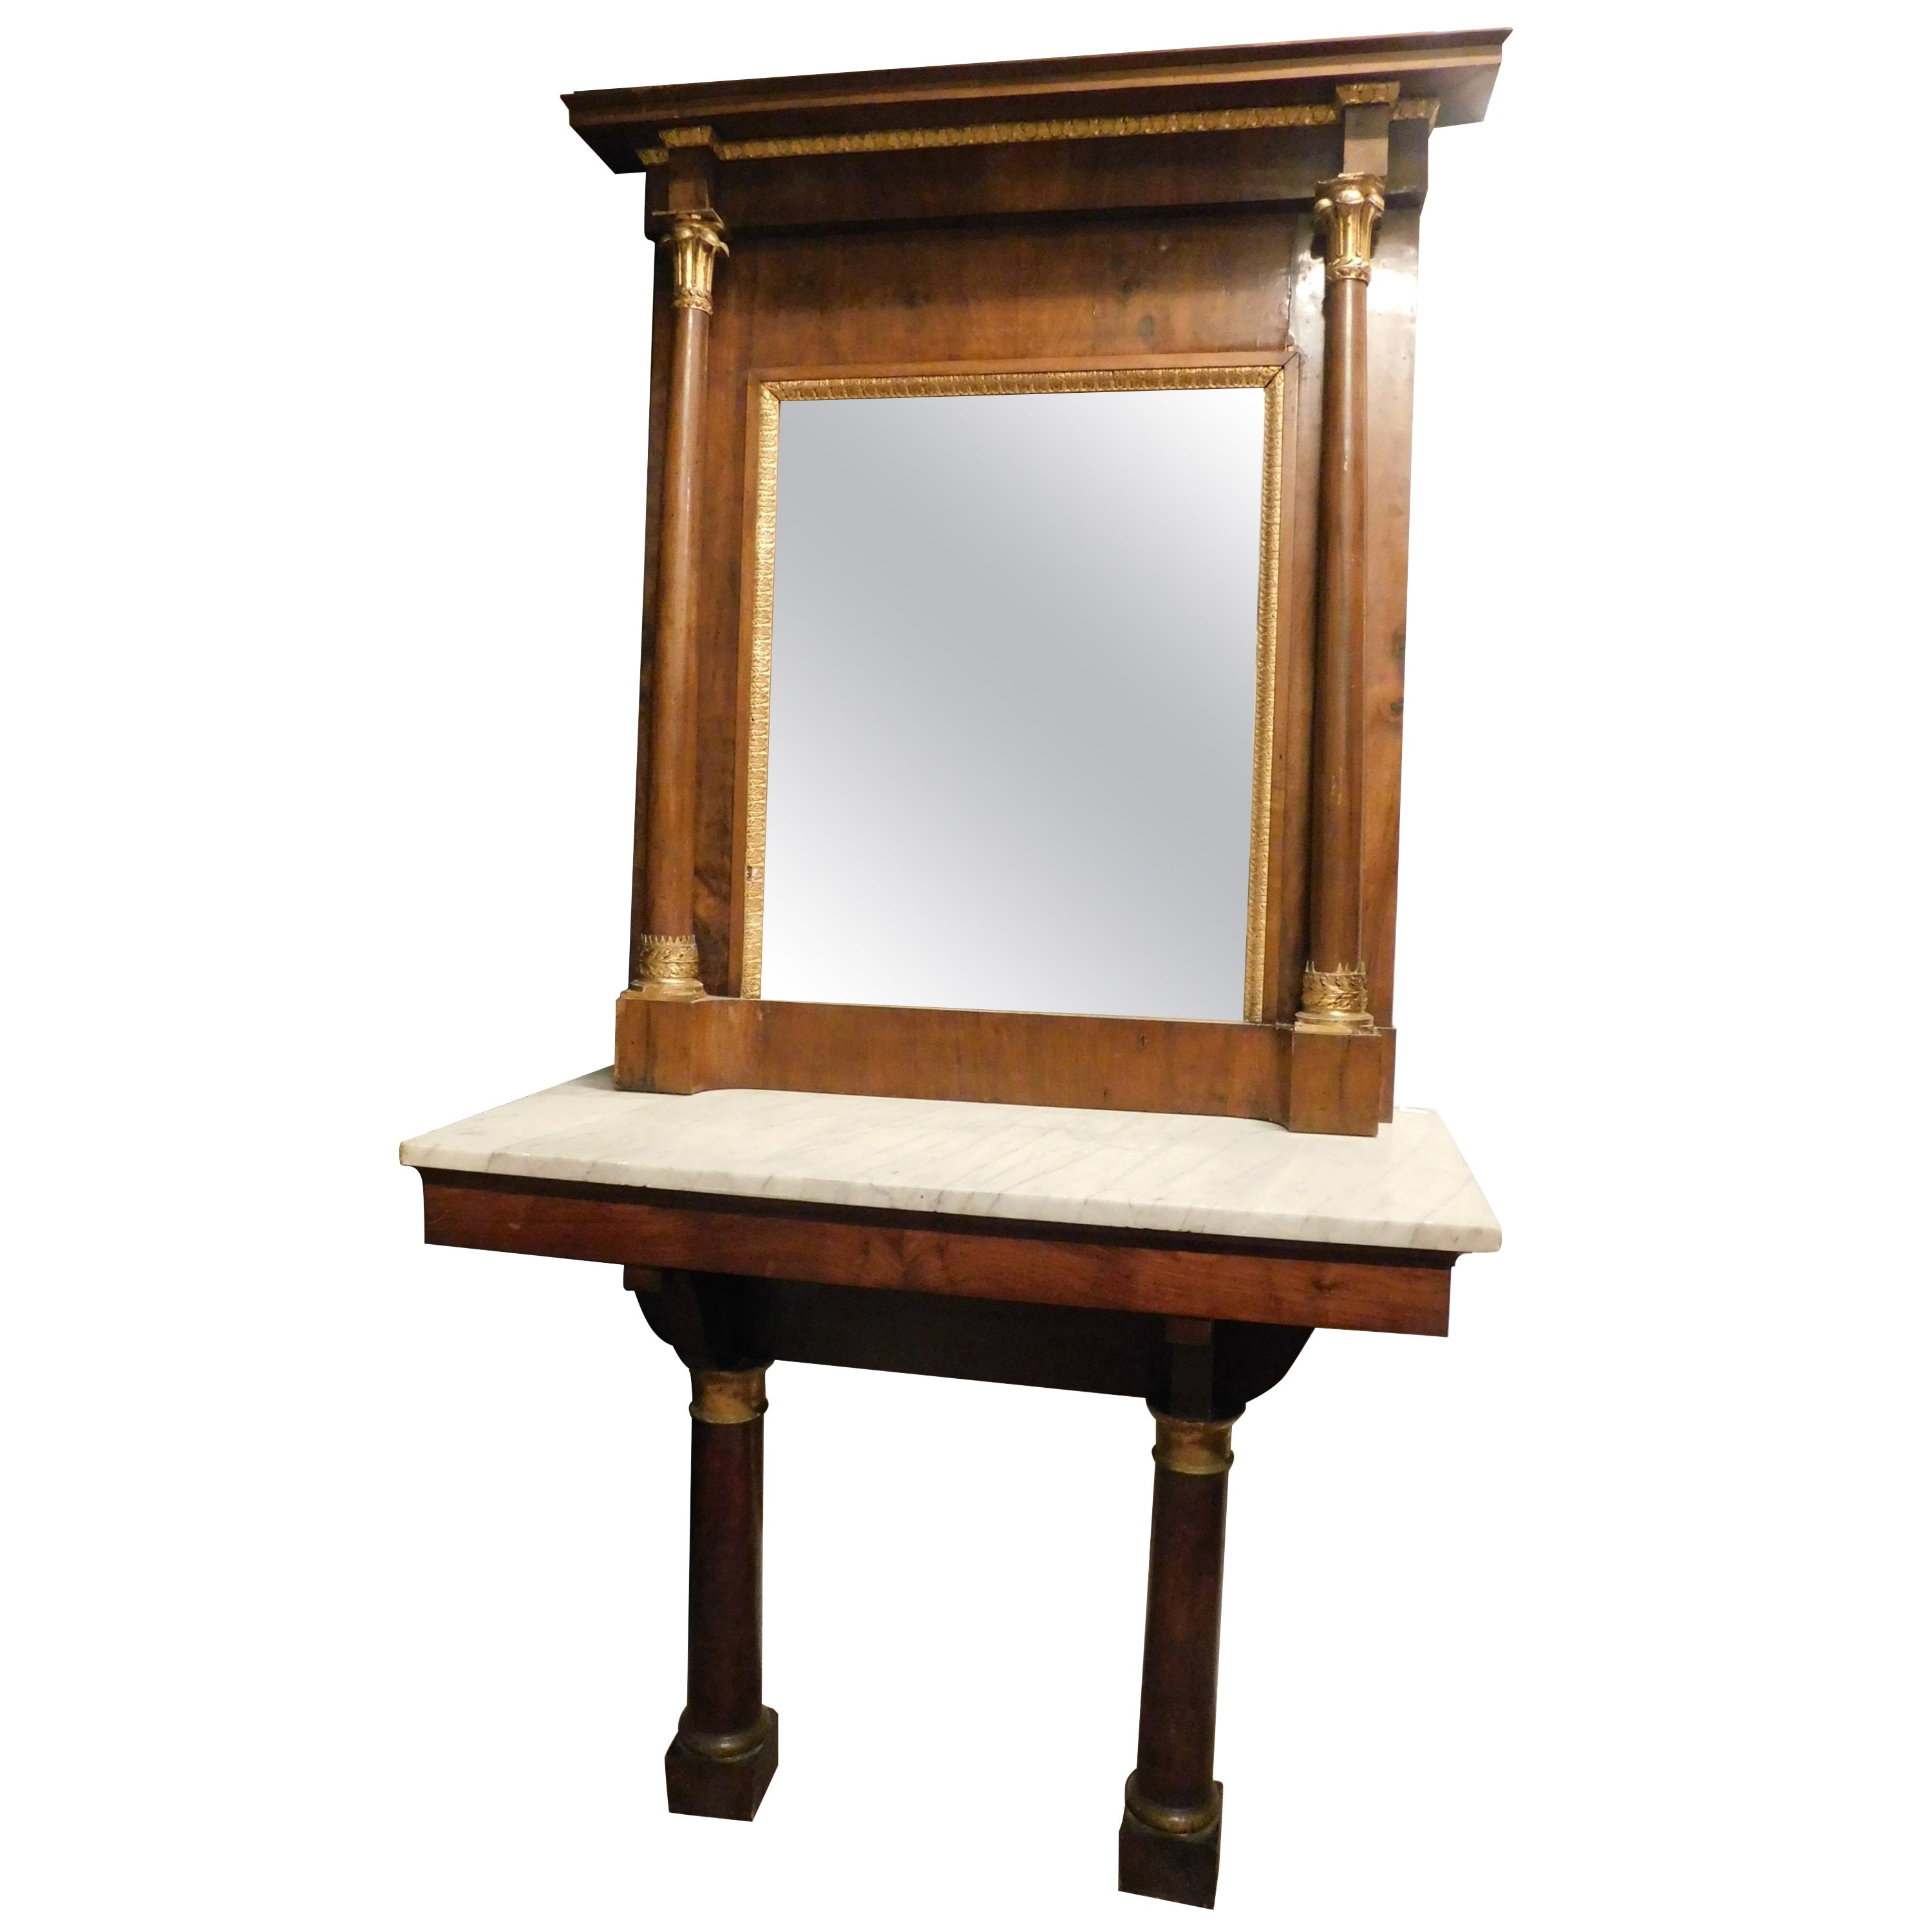 Antique Empire Style Console Table in Walnut with Original Mirror, 19th Century For Sale